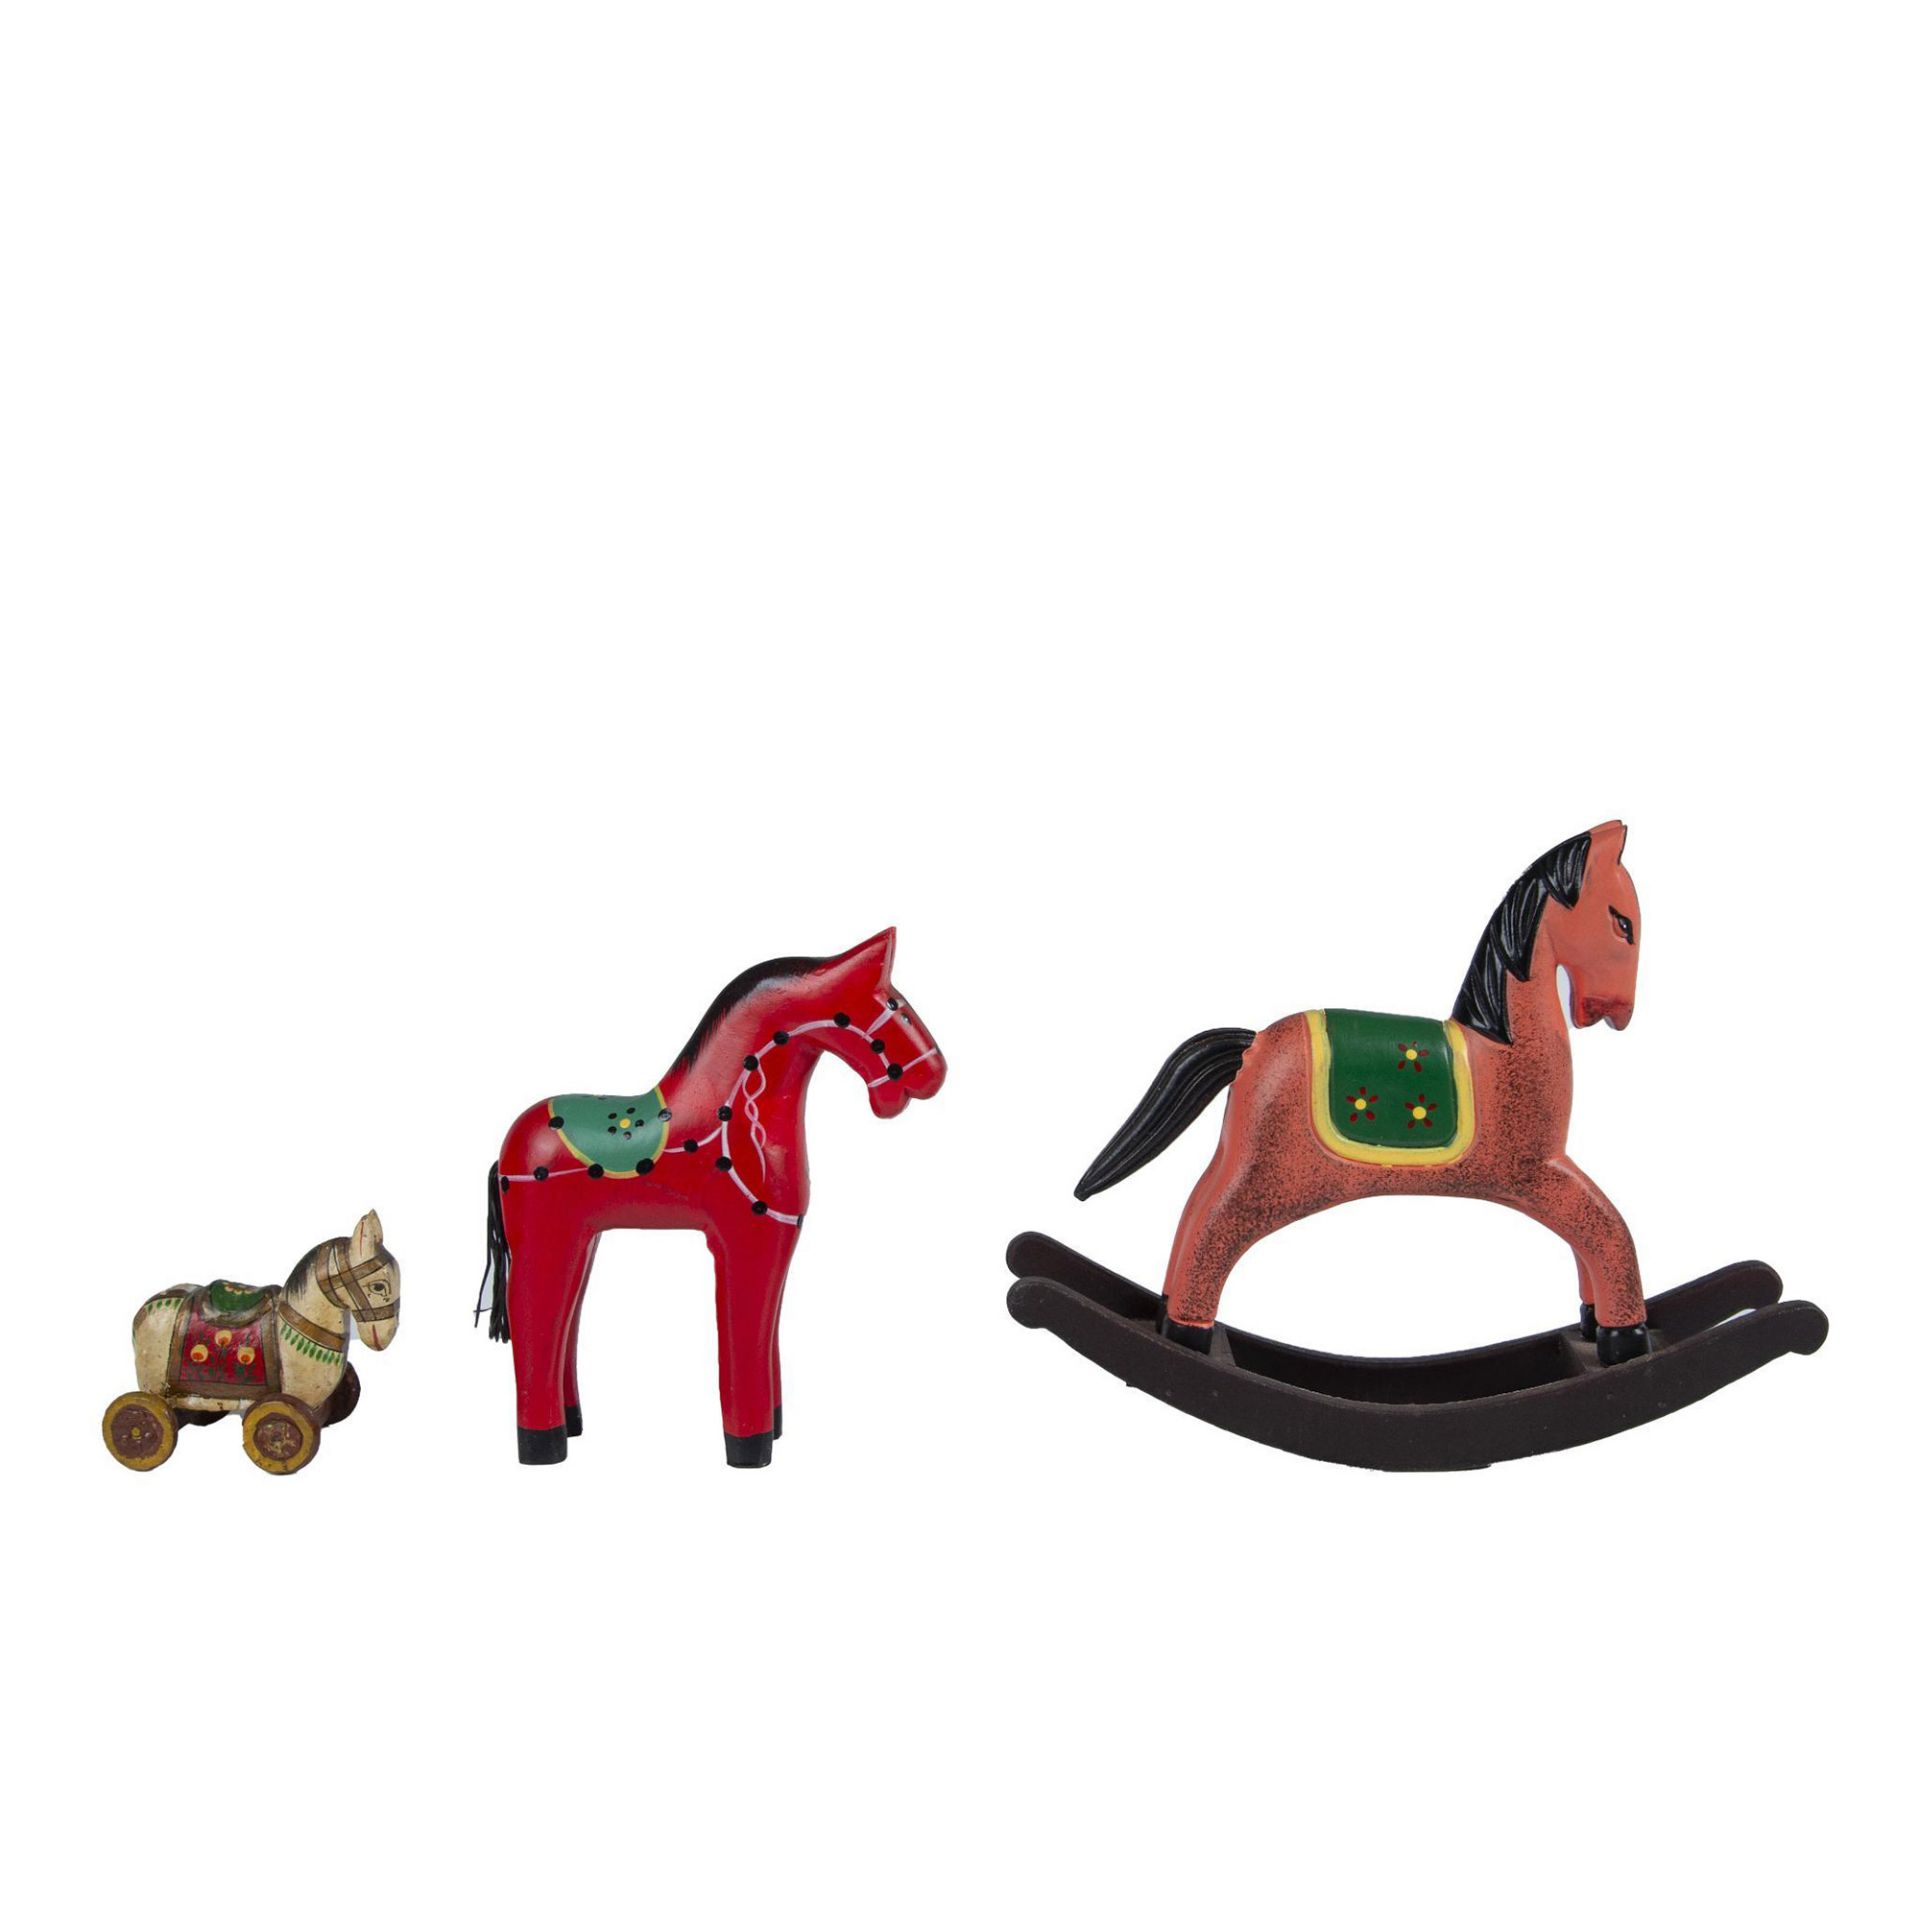 3pc Decorative Painted Wood Horse Grouping - Image 2 of 3